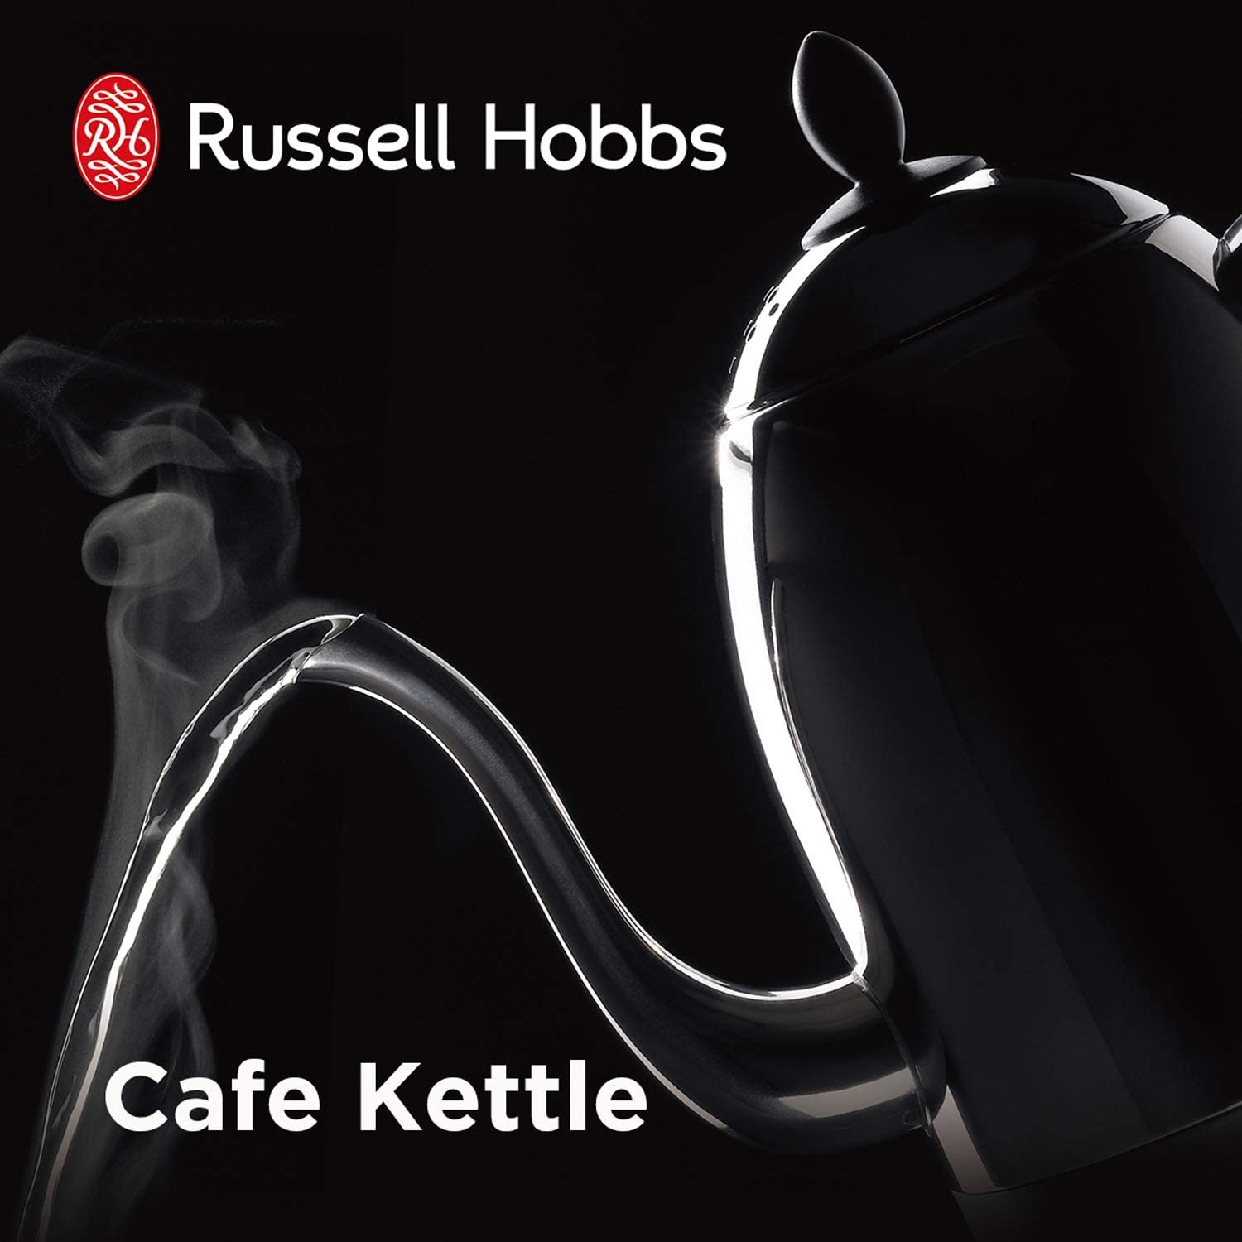 Russell Hobbs(ラッセルホブス) Cafe Kettle 7410JPの商品画像サムネ6 